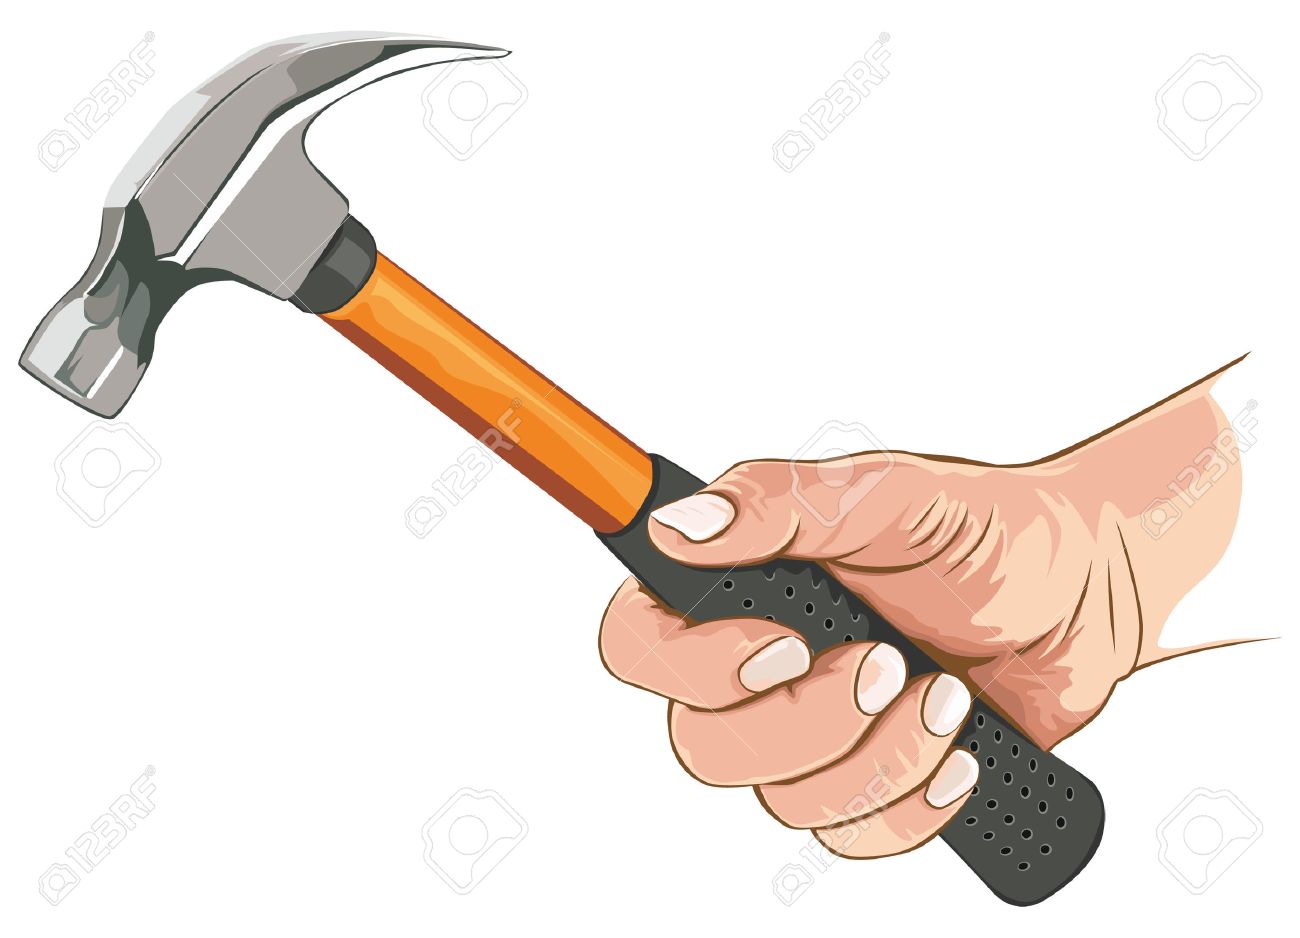 Claw hammer clipart